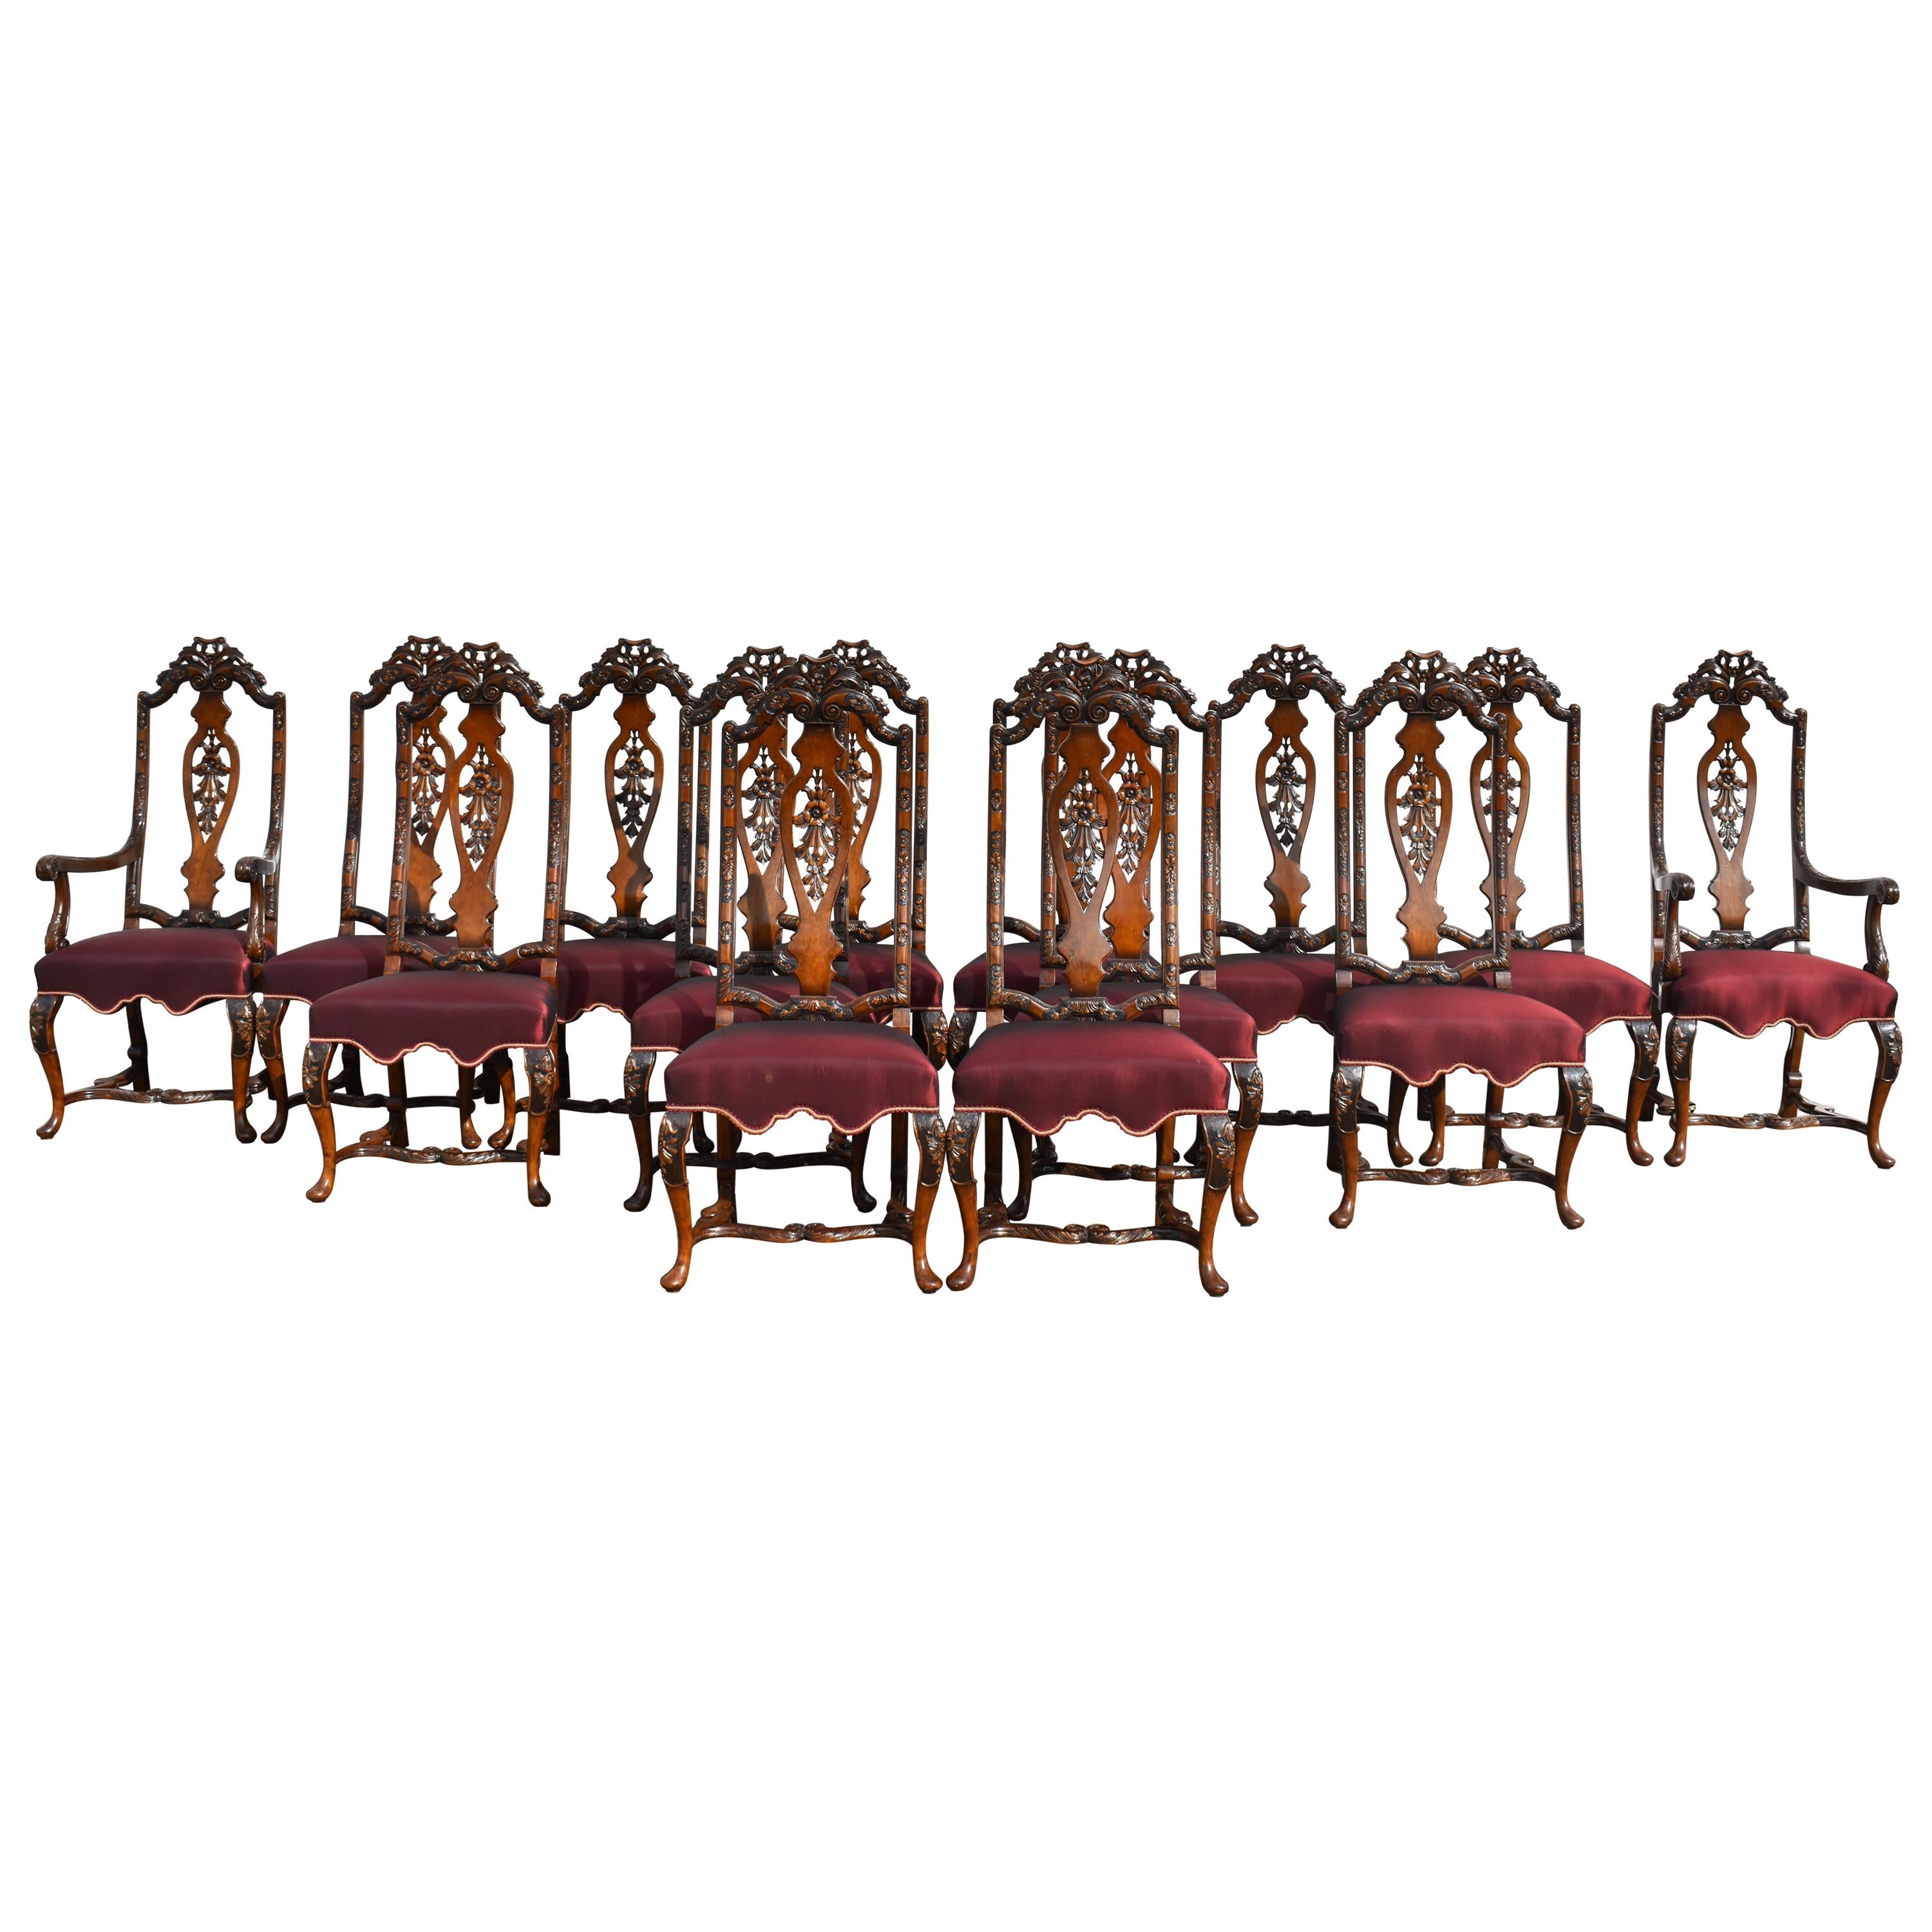 Set of 14 20th Century English Antique Queen Anne Style Dining Chairs